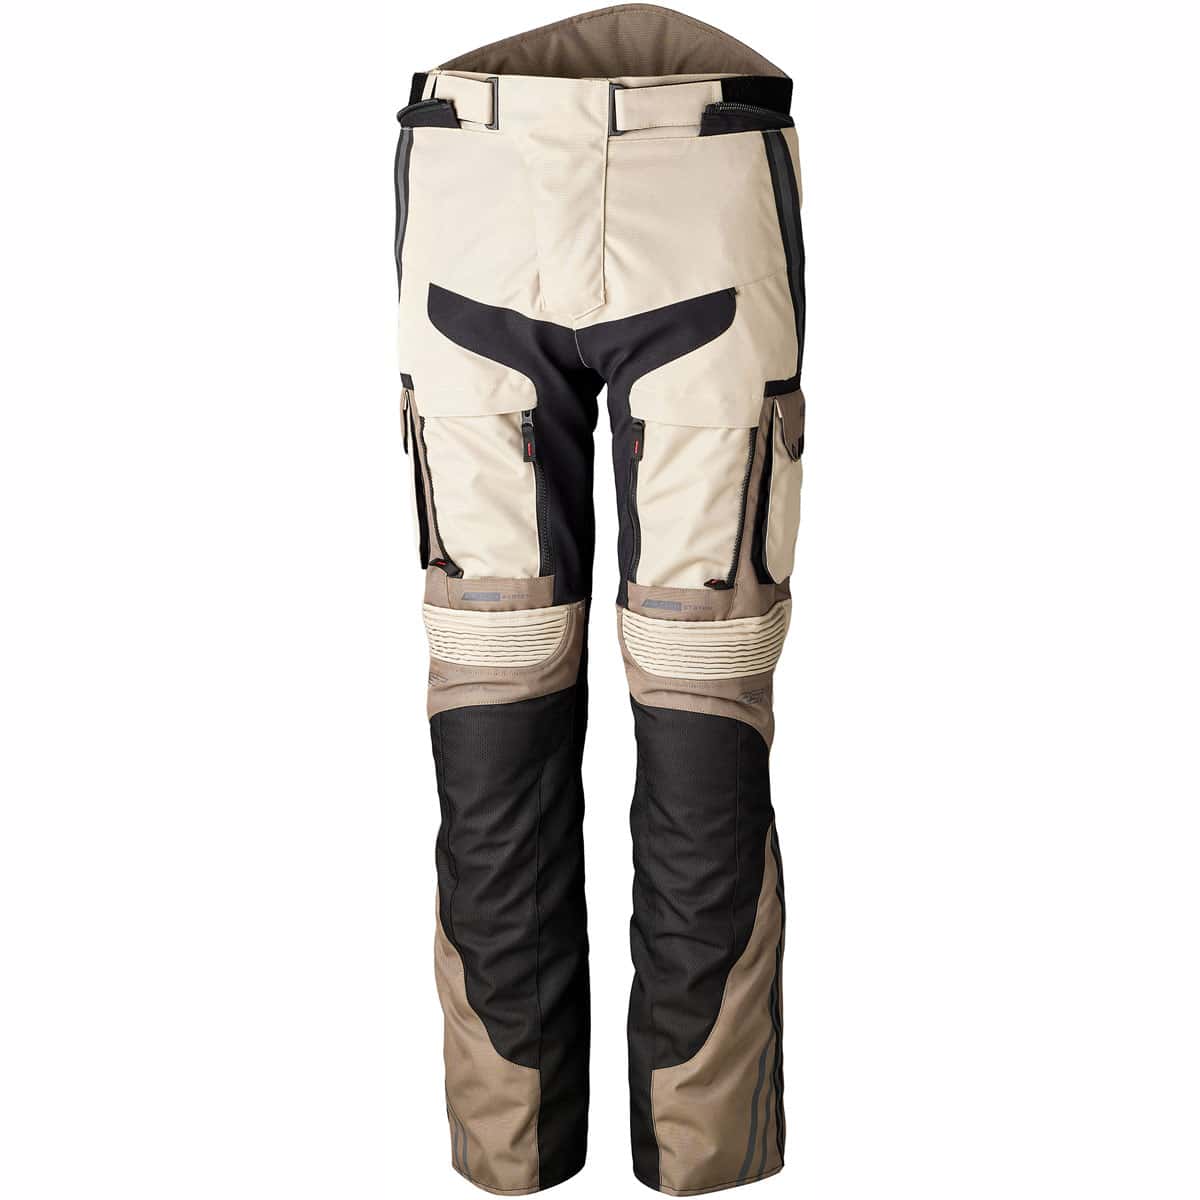 Looking for the ultimate adventure riding experience? Look no further than the RST Pro Series Adventure-X trousers